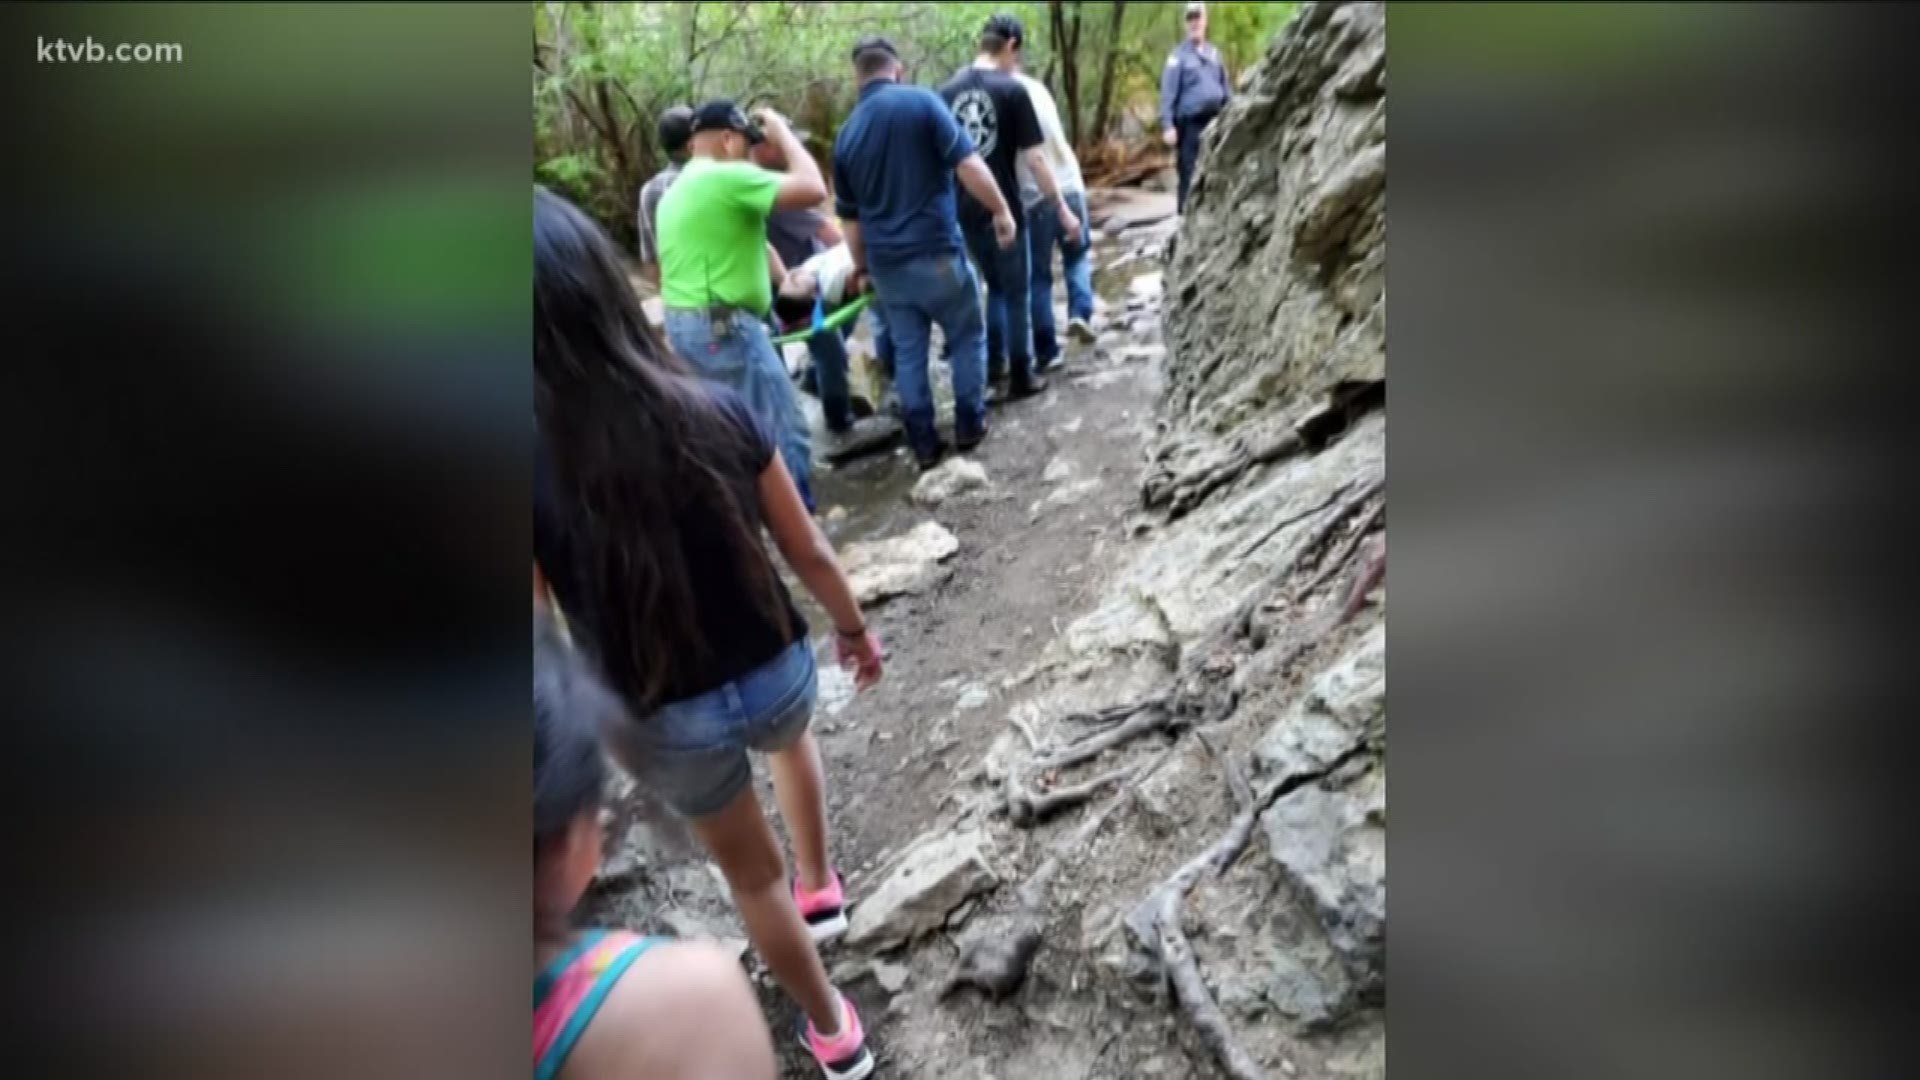 The man's leg was crushed by a boulder at Jump Creek Falls after he saved his daughter from being in its path.